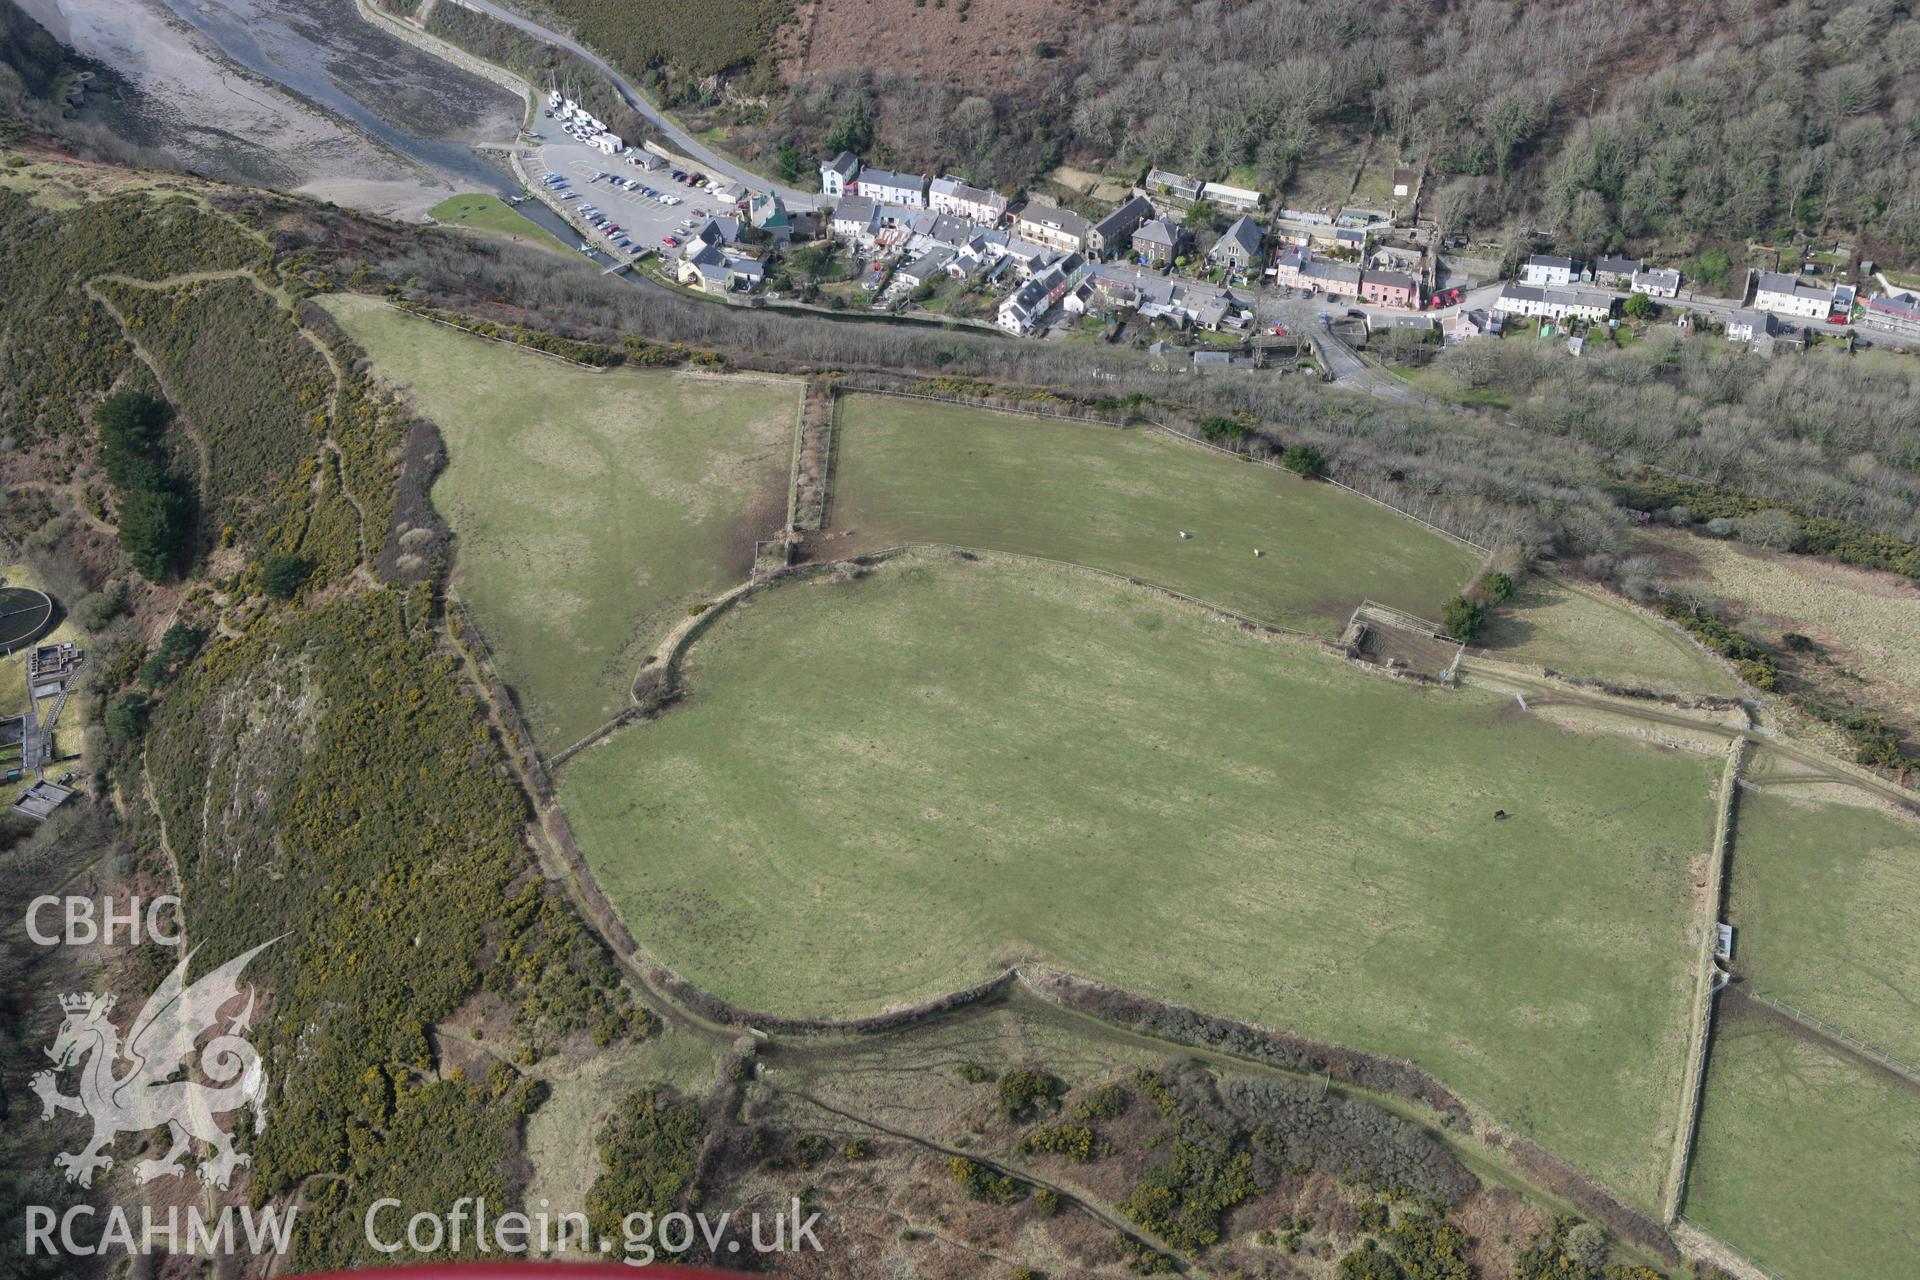 RCAHMW colour oblique aerial photograph of Solva Enclosure. Taken on 02 March 2010 by Toby Driver